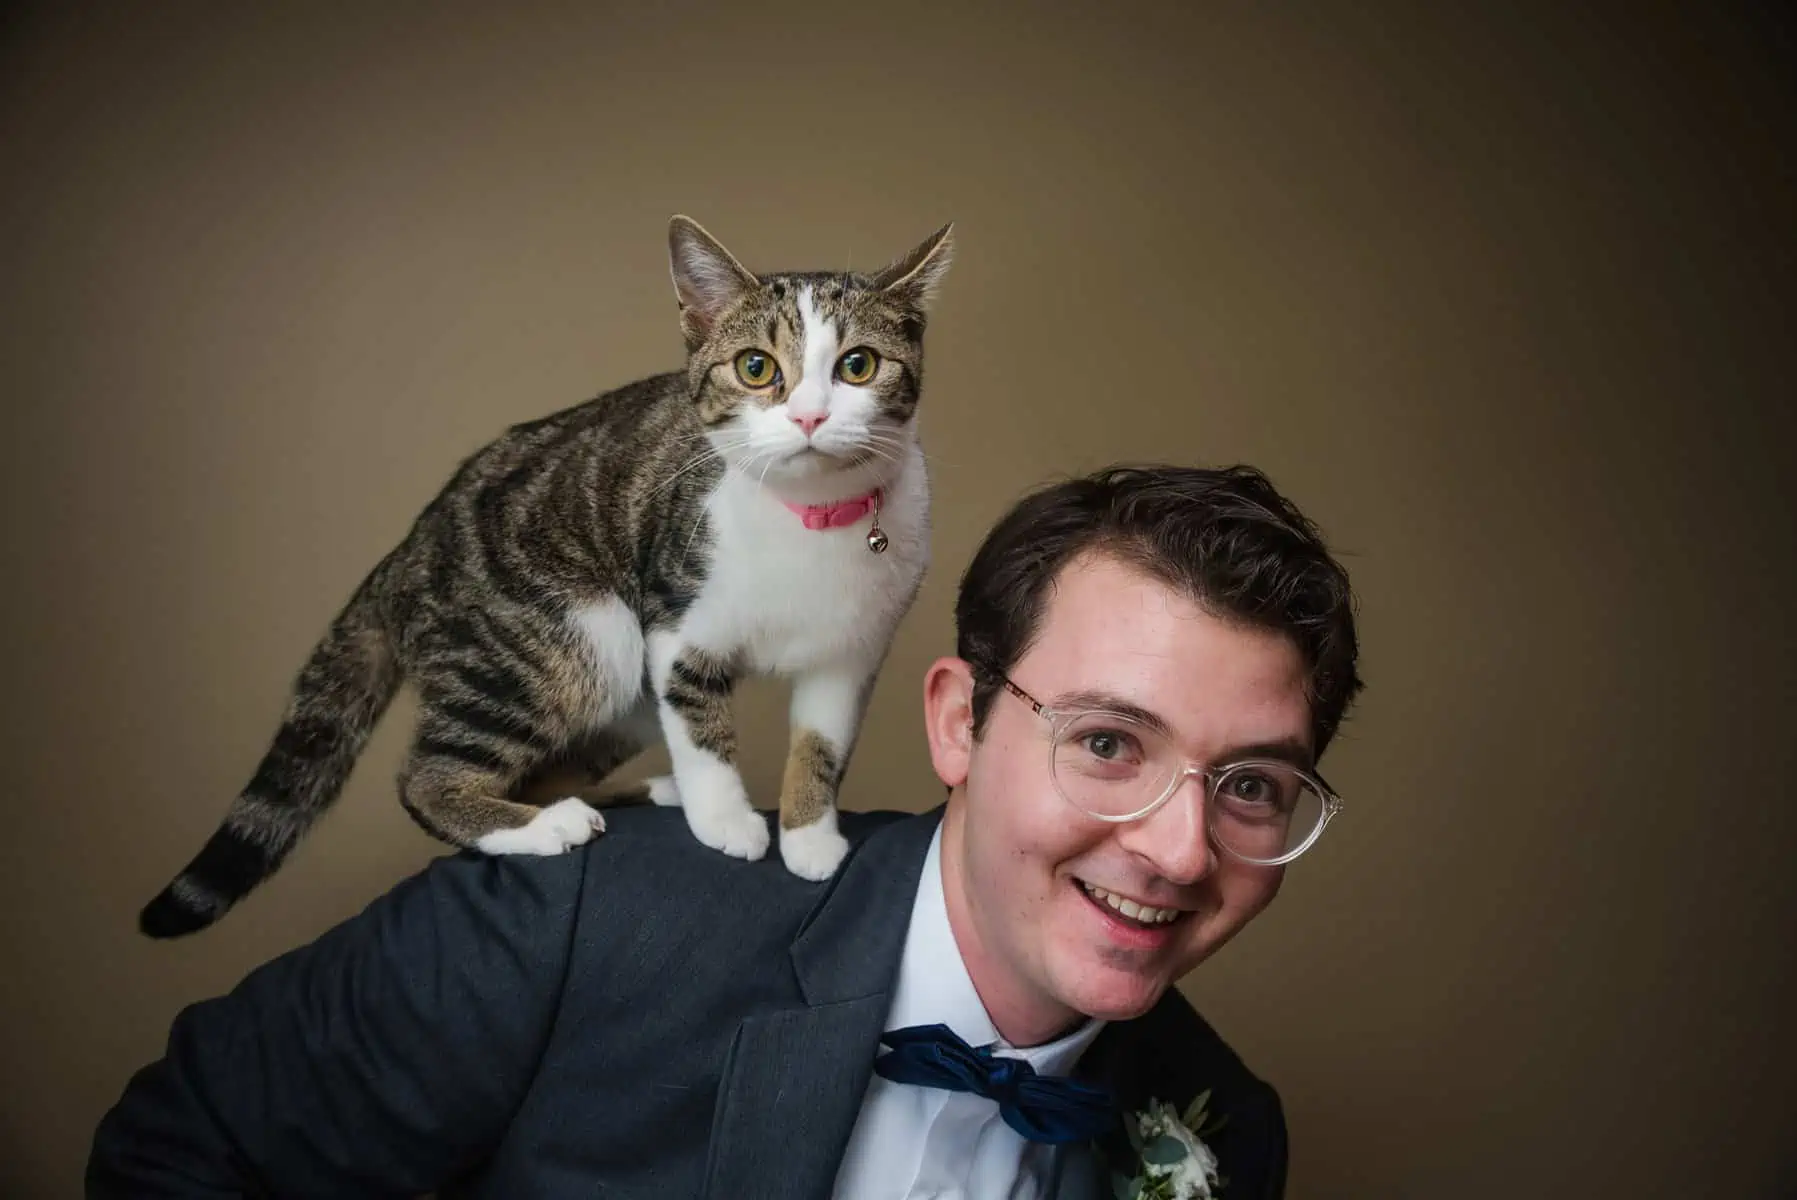 A man wearing a suit with a cat on his shoulder.